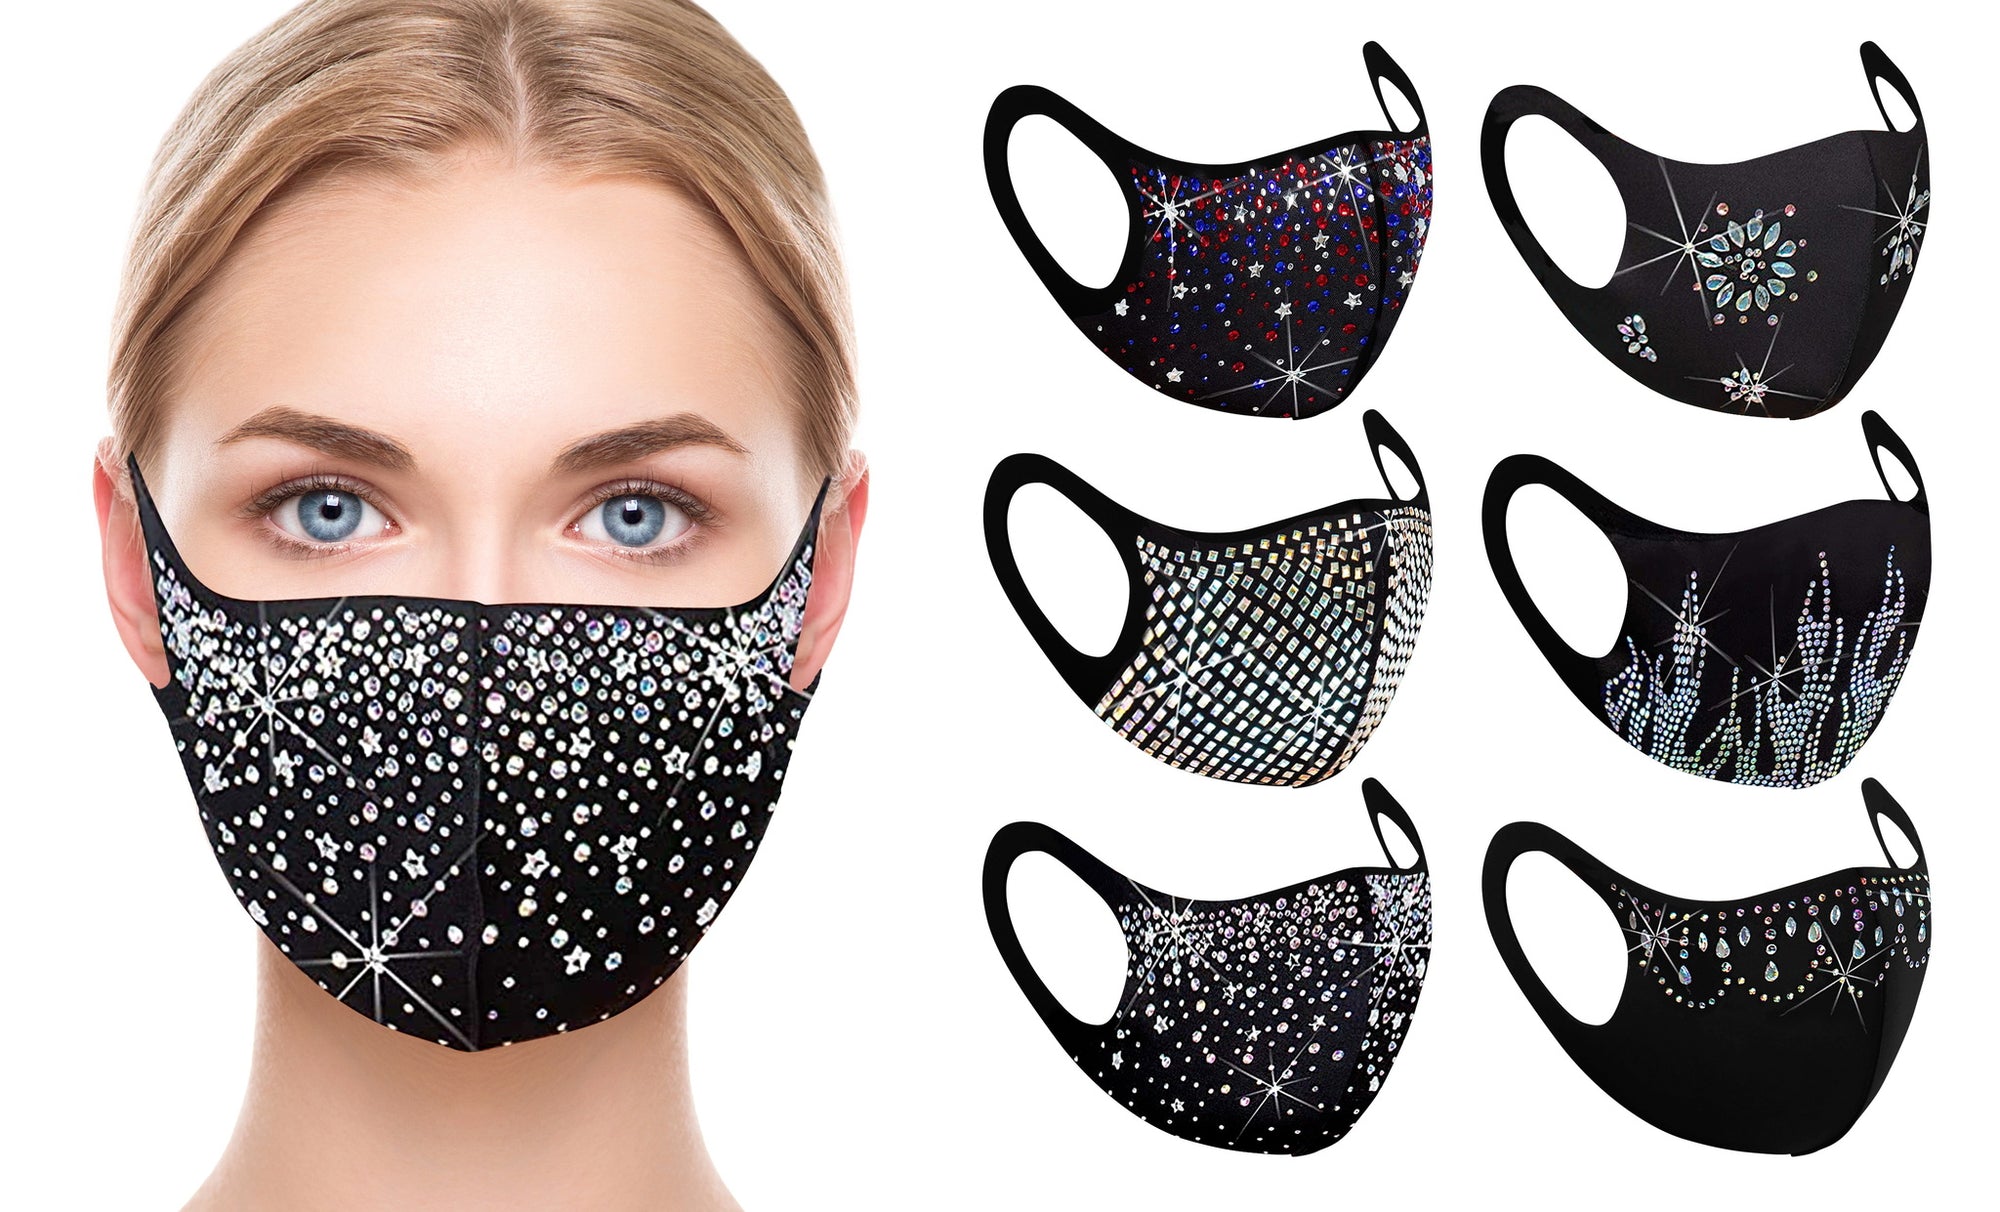 Sparkly Rhinestone Face Mask, Bling Face Mask-Sequin Mask for Women